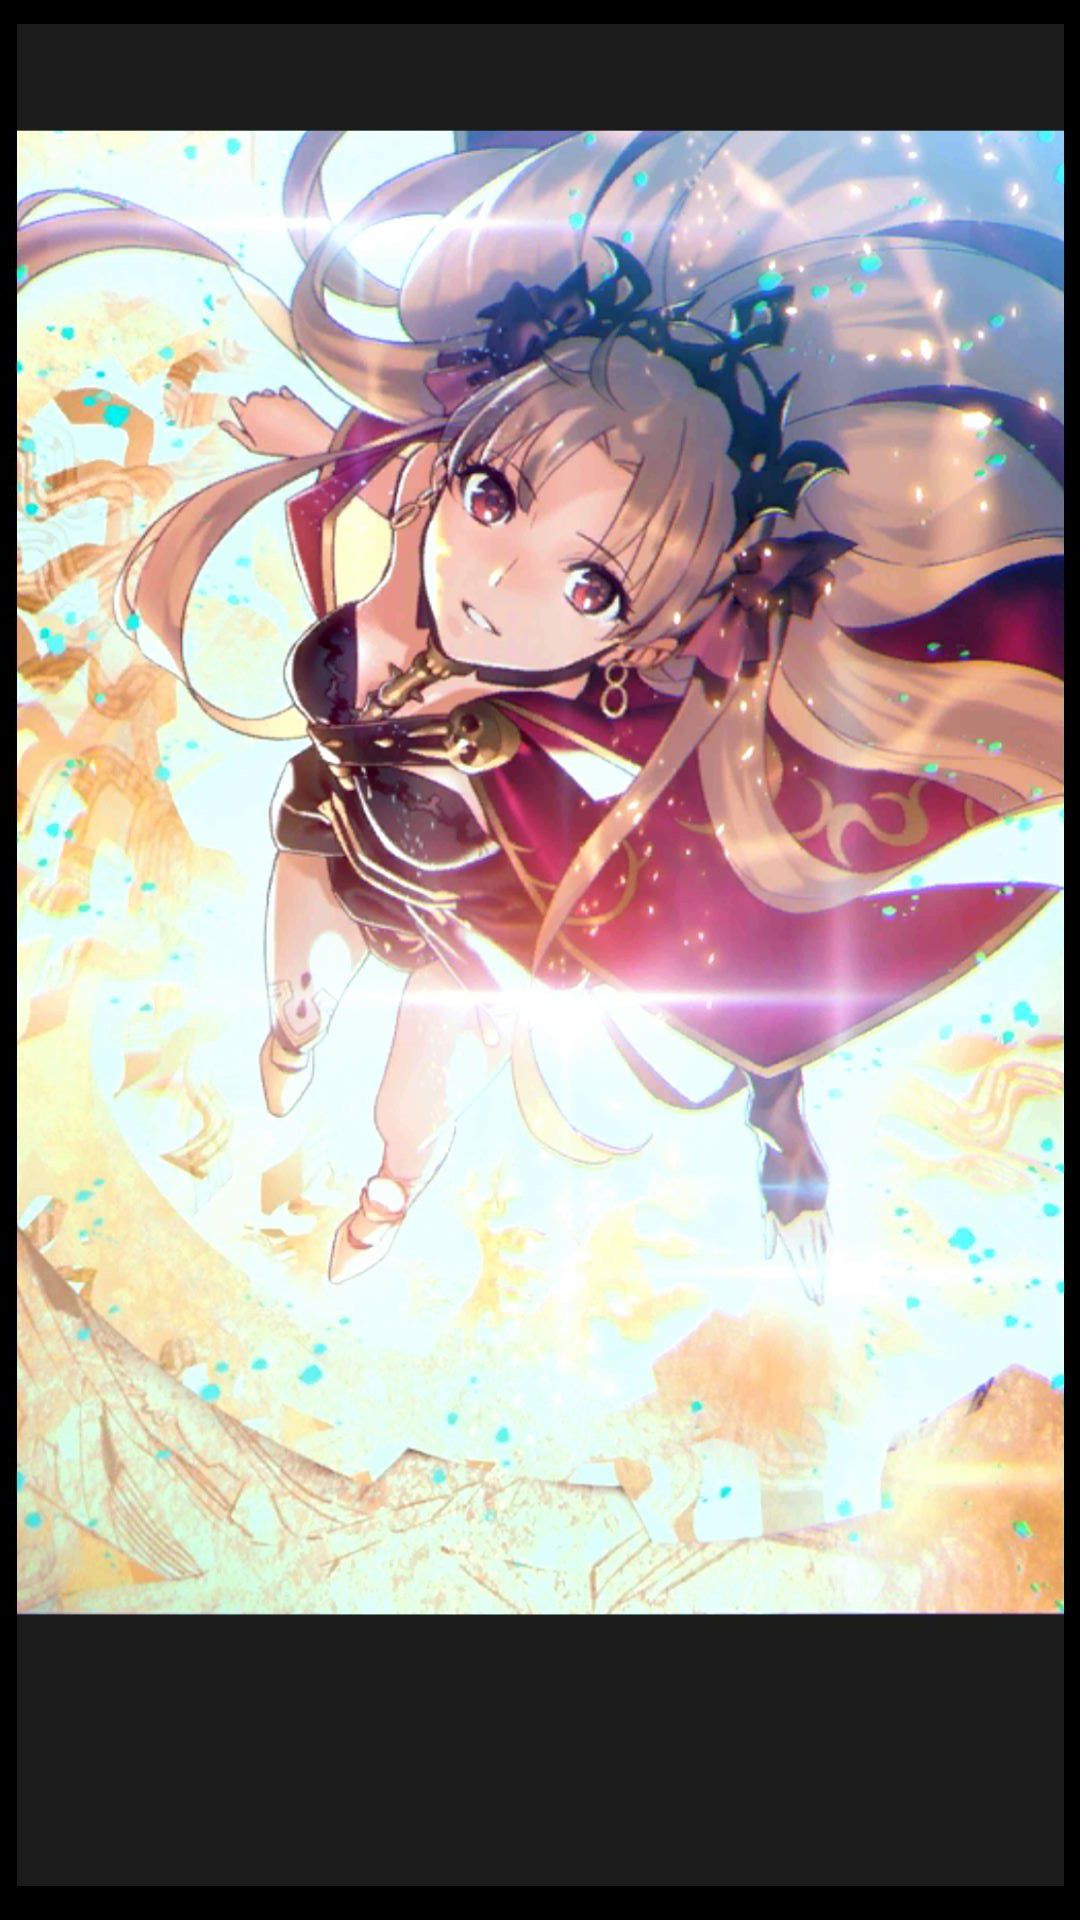 [Fate/Grand order] The final second coming illustrations cute Ereshkigal transcendence! 9